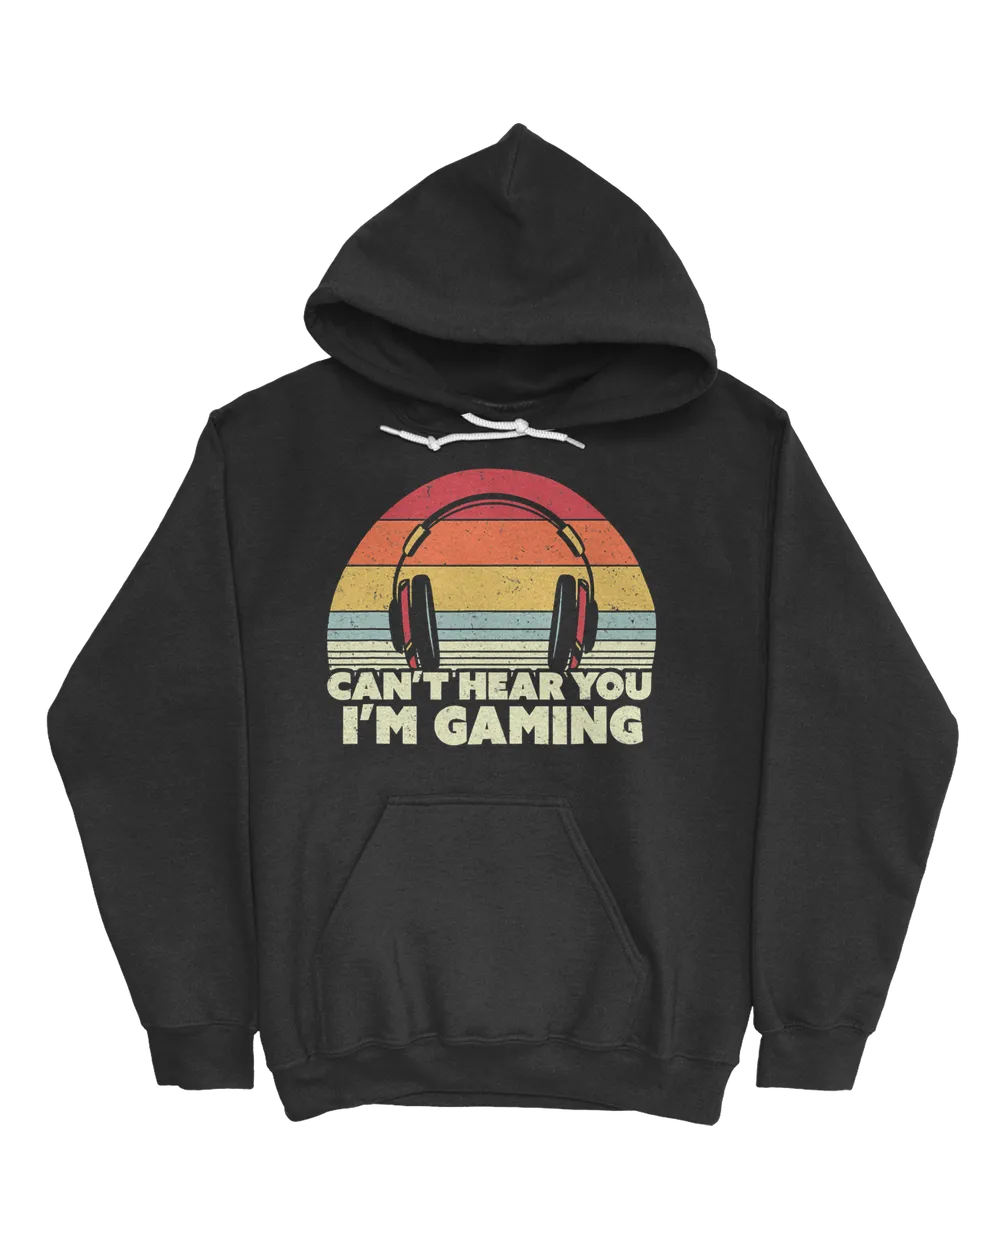 Funny Gamer Gift Idea, Can't Hear You I'm Gaming T-Shirt